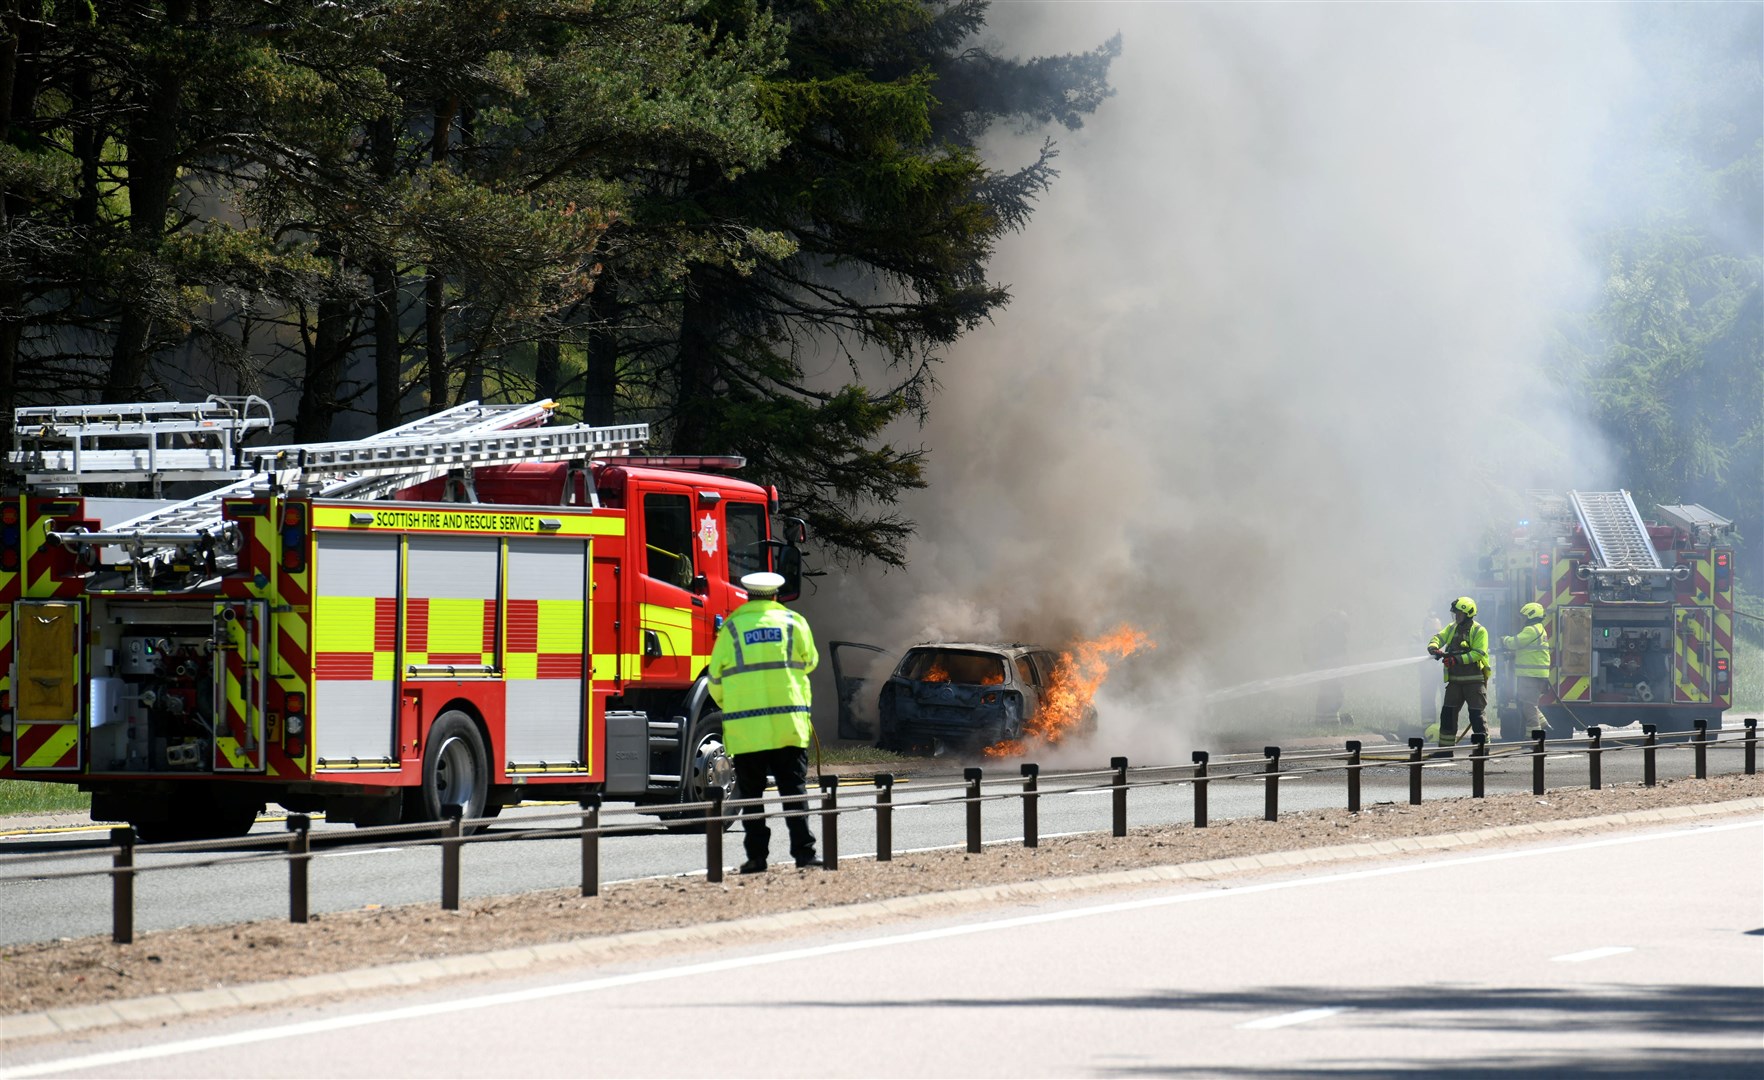 The car was engulfed in flames, according to a passing motorist.